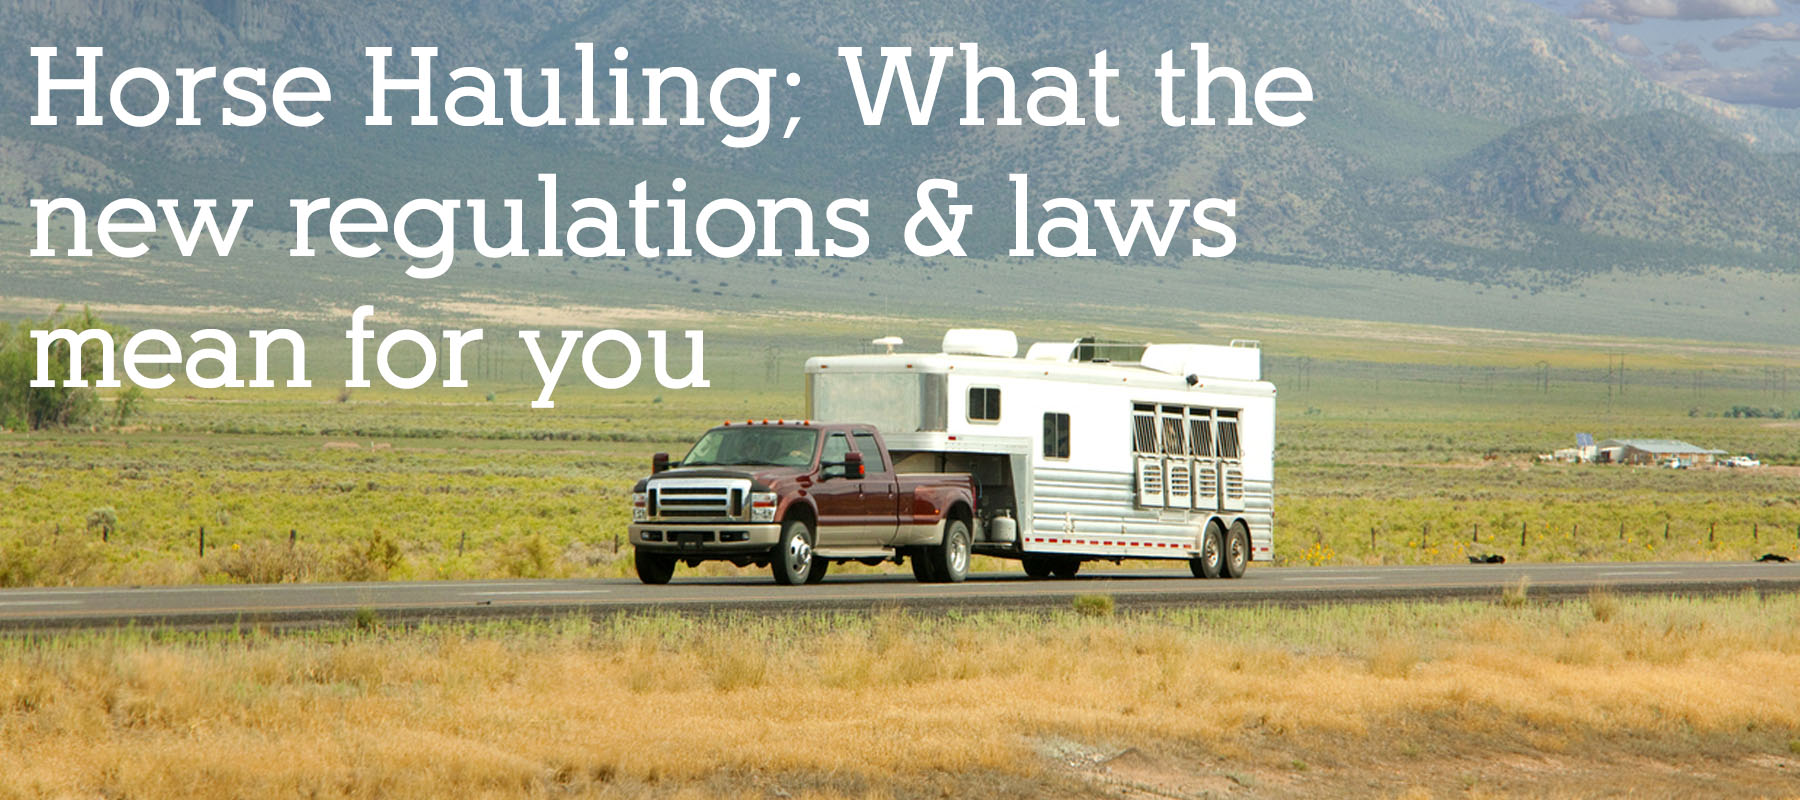 Horse Hauling - what the new regulations and laws mean for you